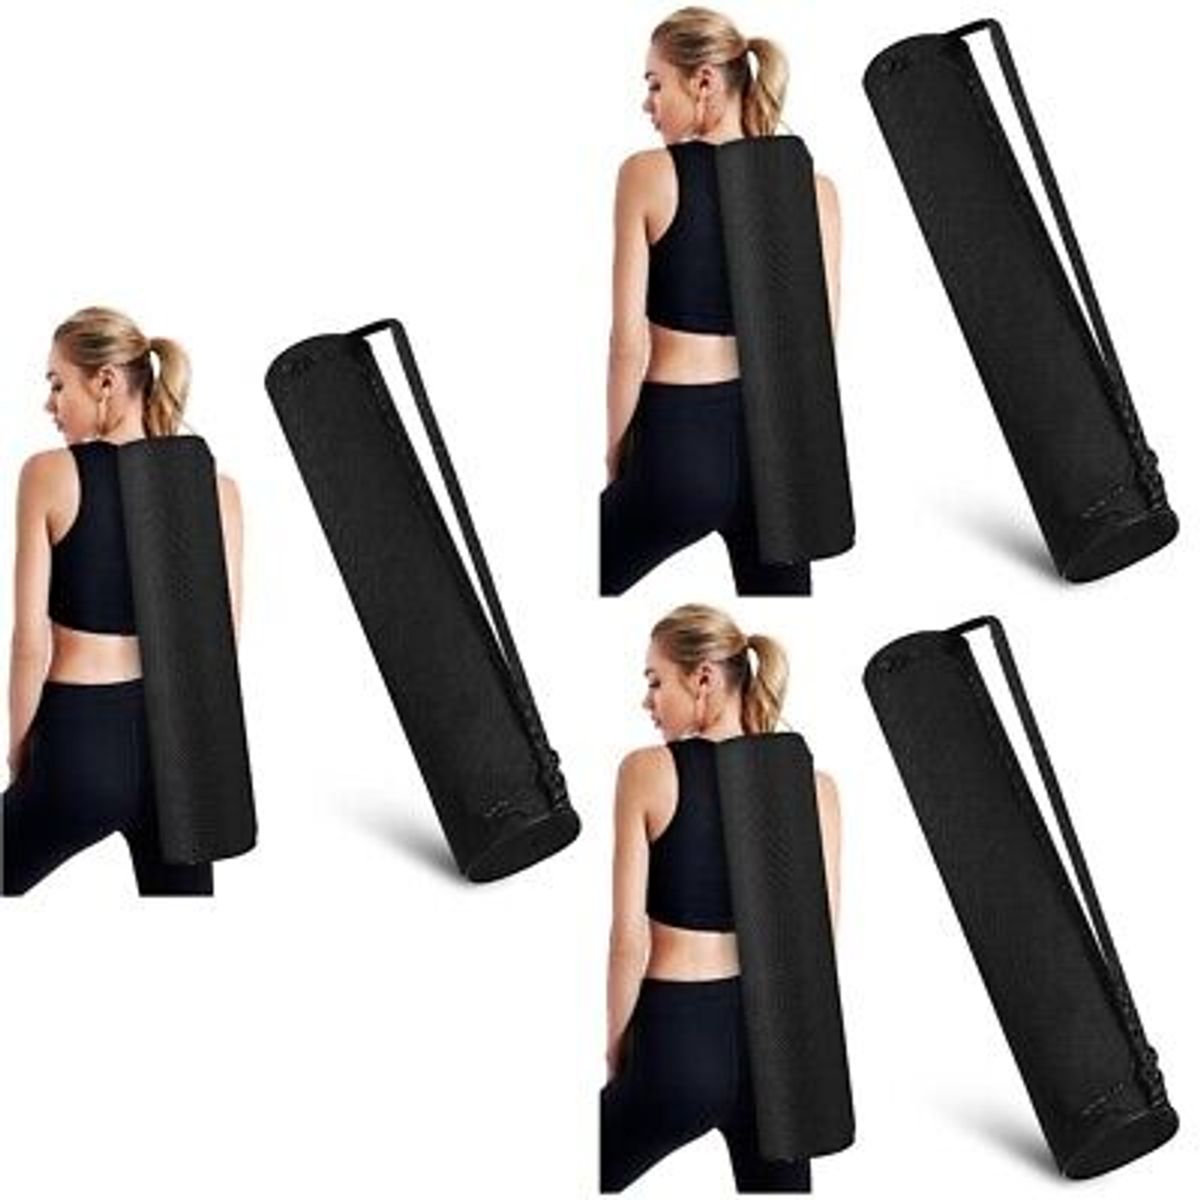 The Convenience of a Gym Bag with Yoga Mat Holder